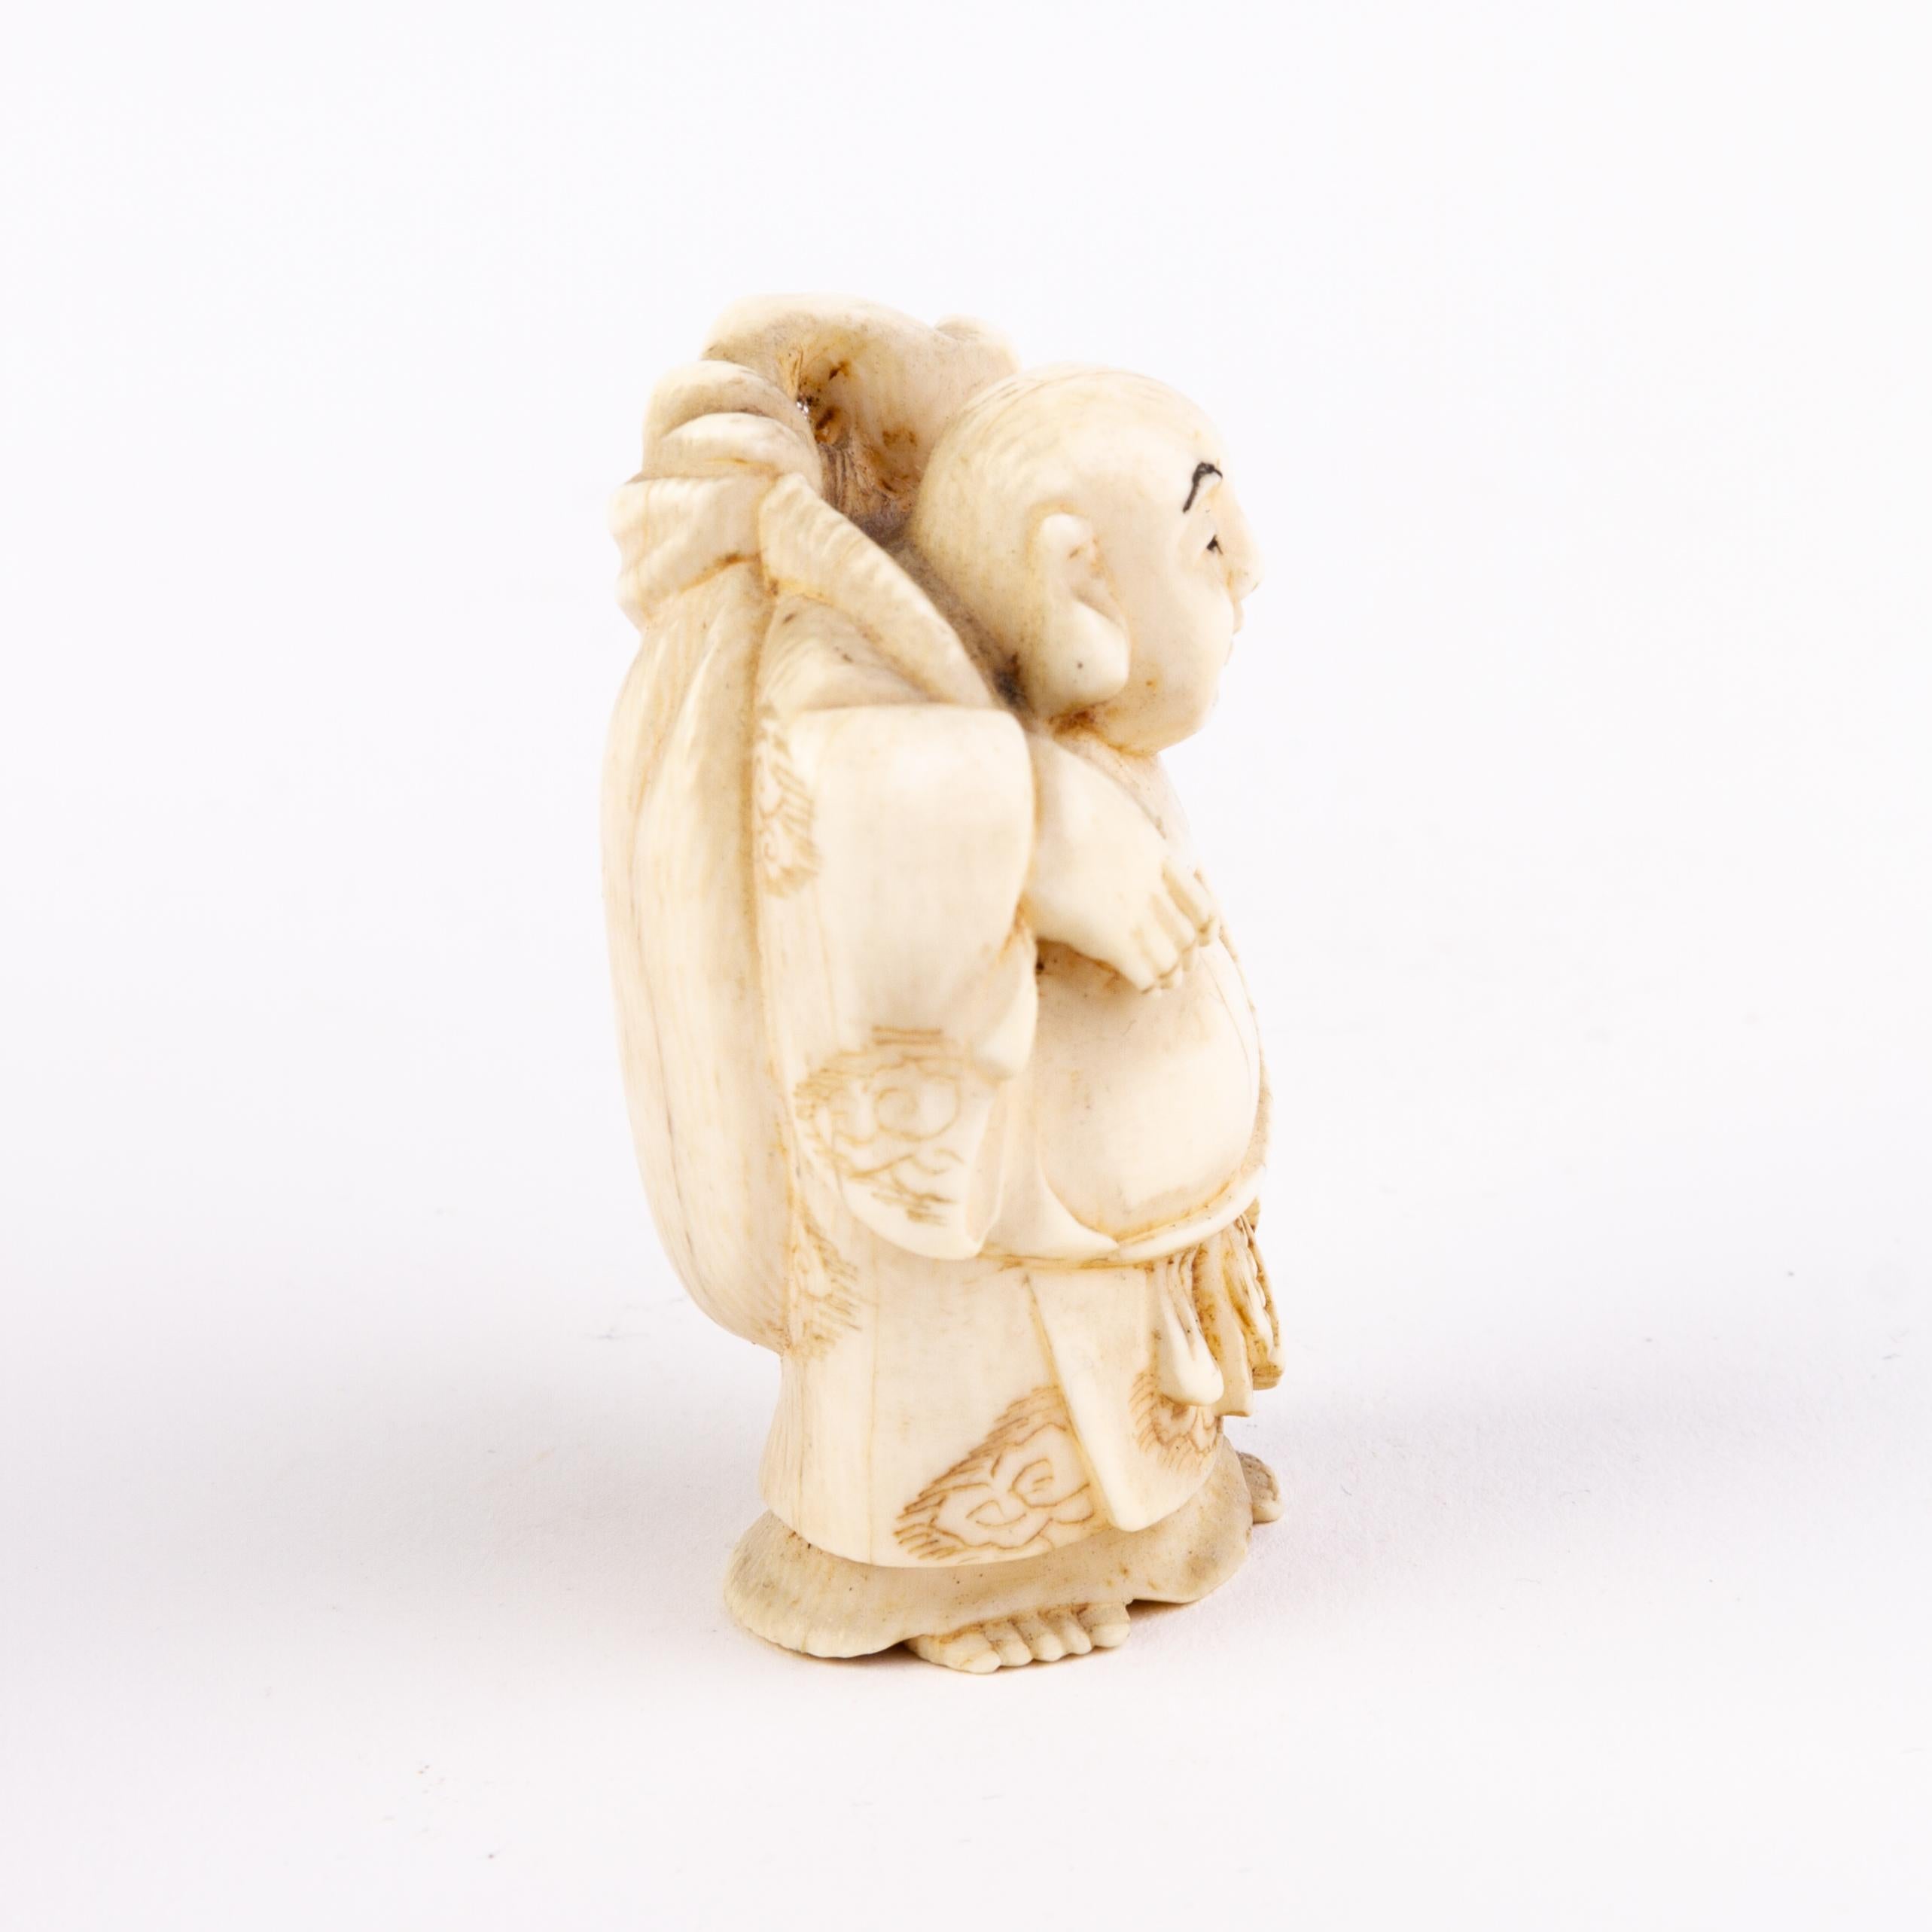 In good condition
From a private collection
Free international shipping
Signed Japanese Carved Netsuke Inro of Buddha 